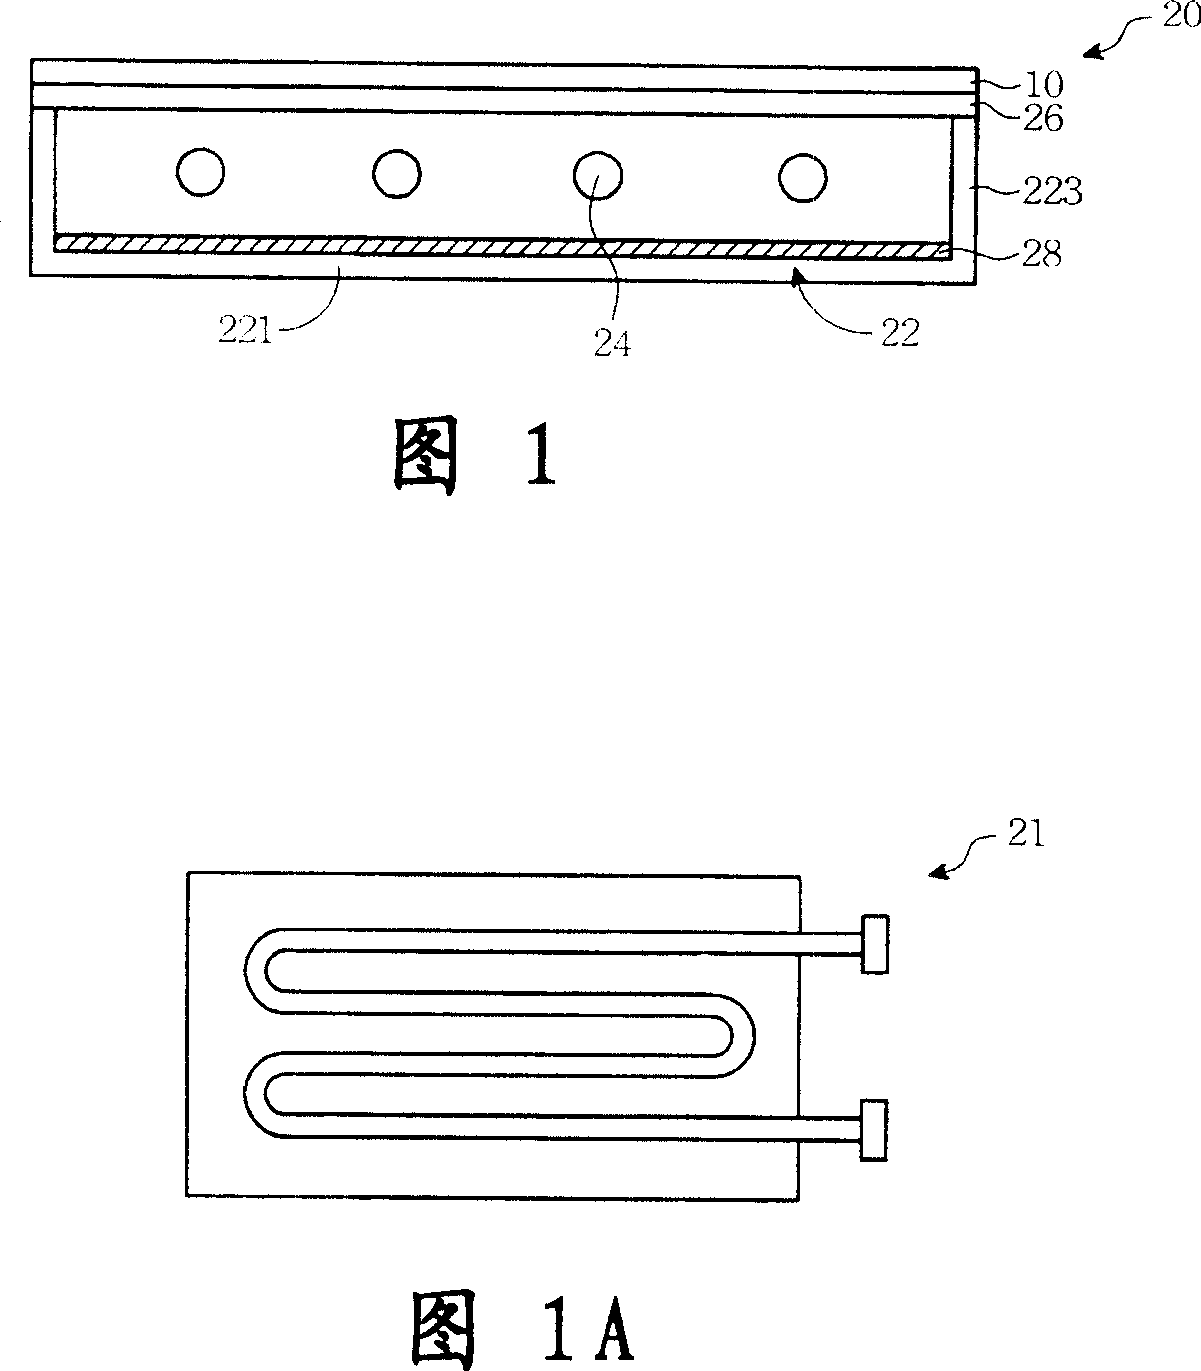 Direct downward optical background modular set and its supporting posts